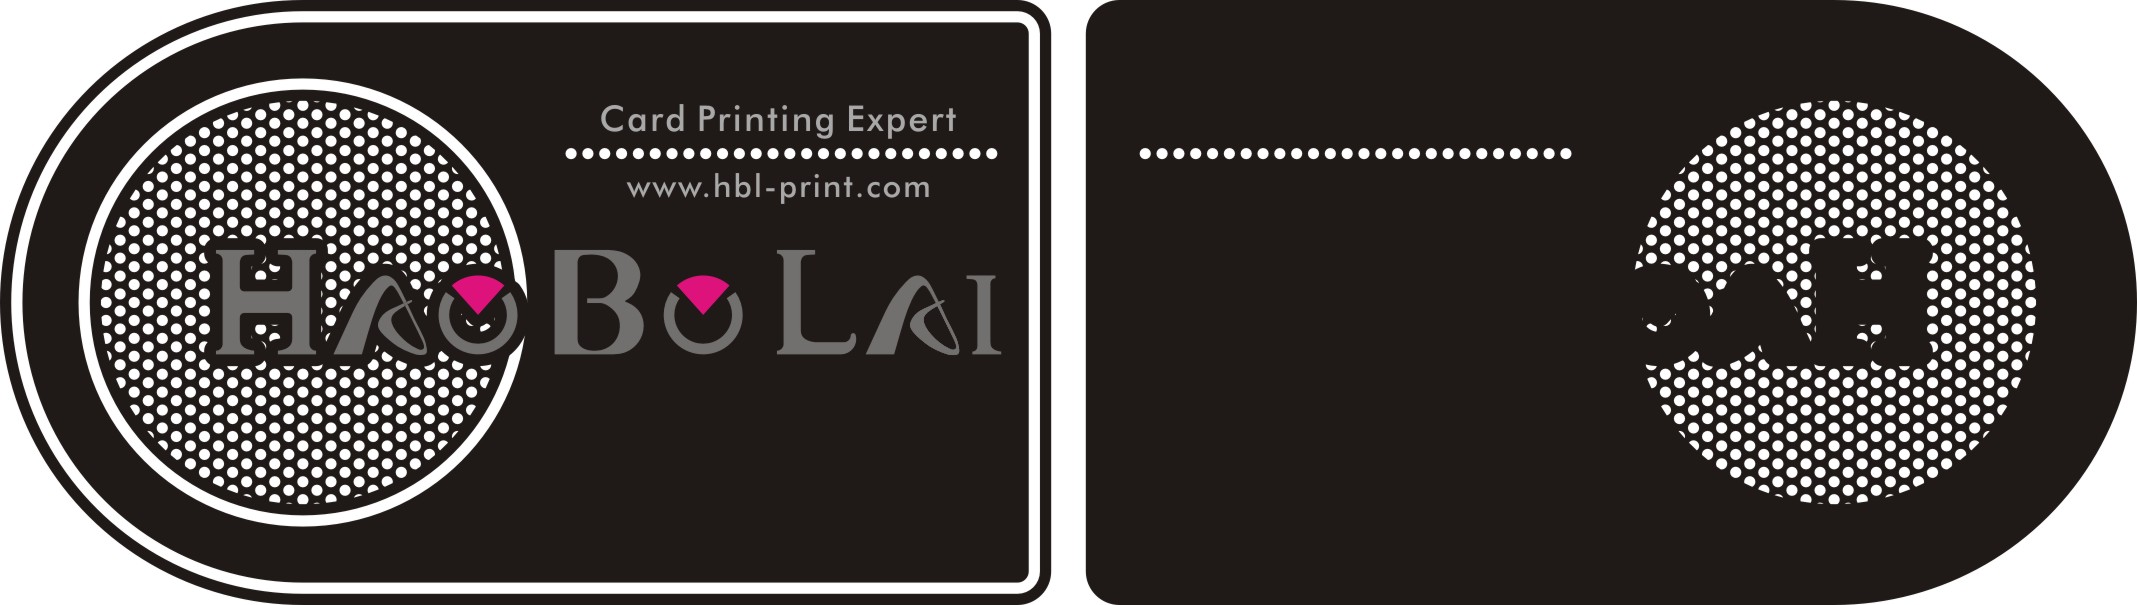 Free-Business-Card-Template (12)